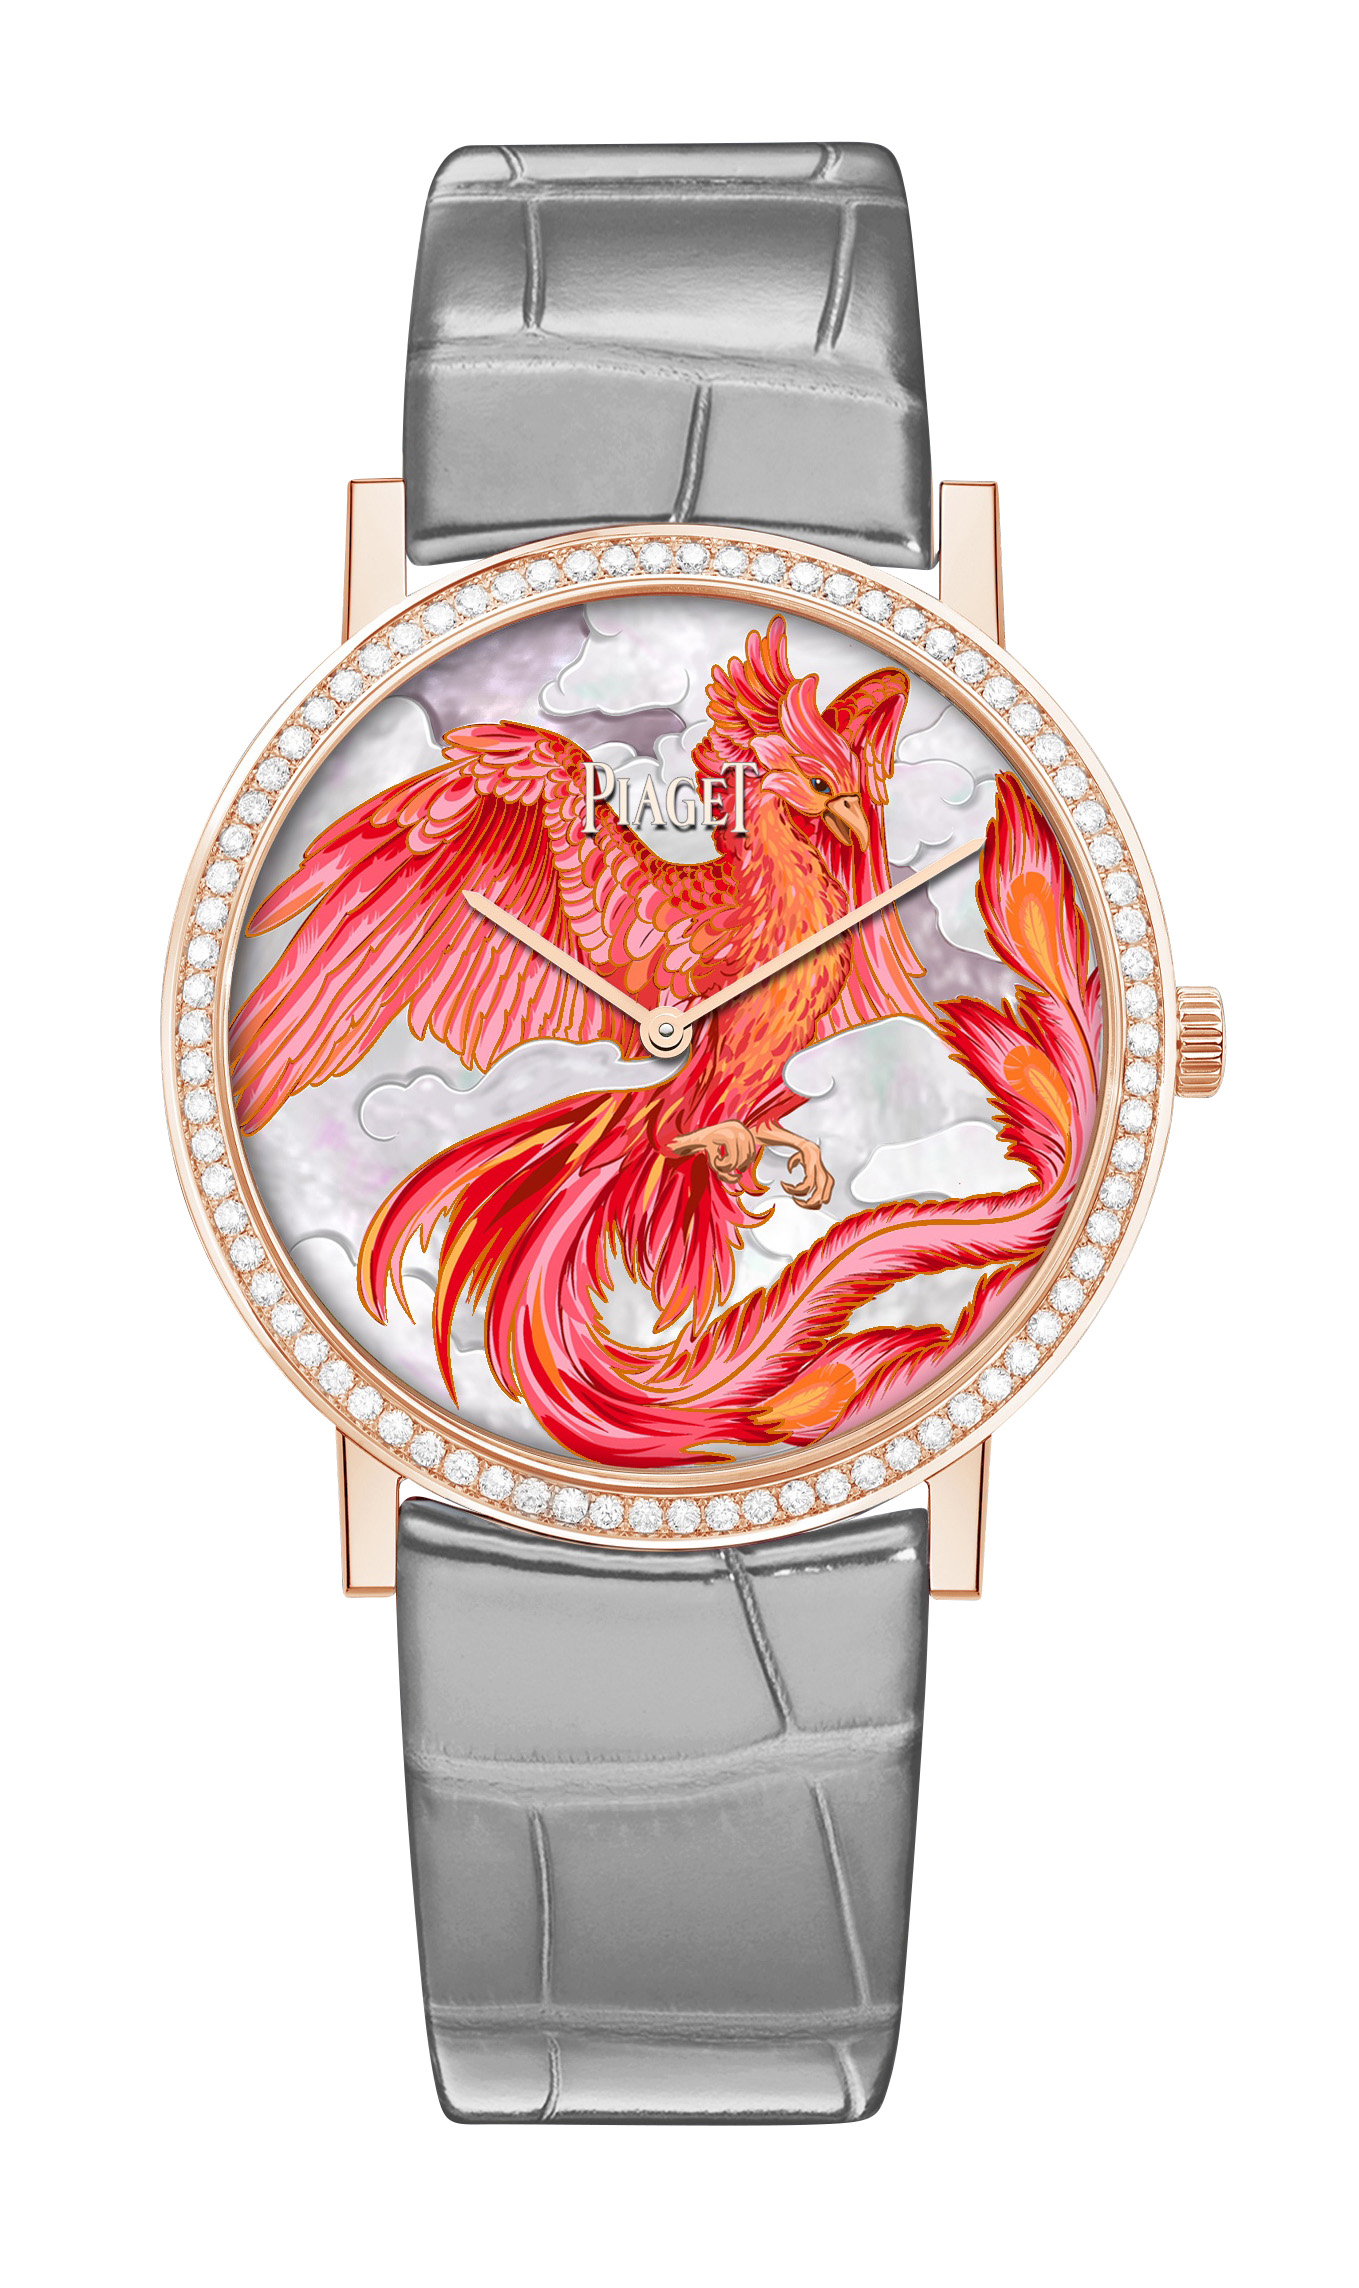 Piaget's Lunar New Year Collection